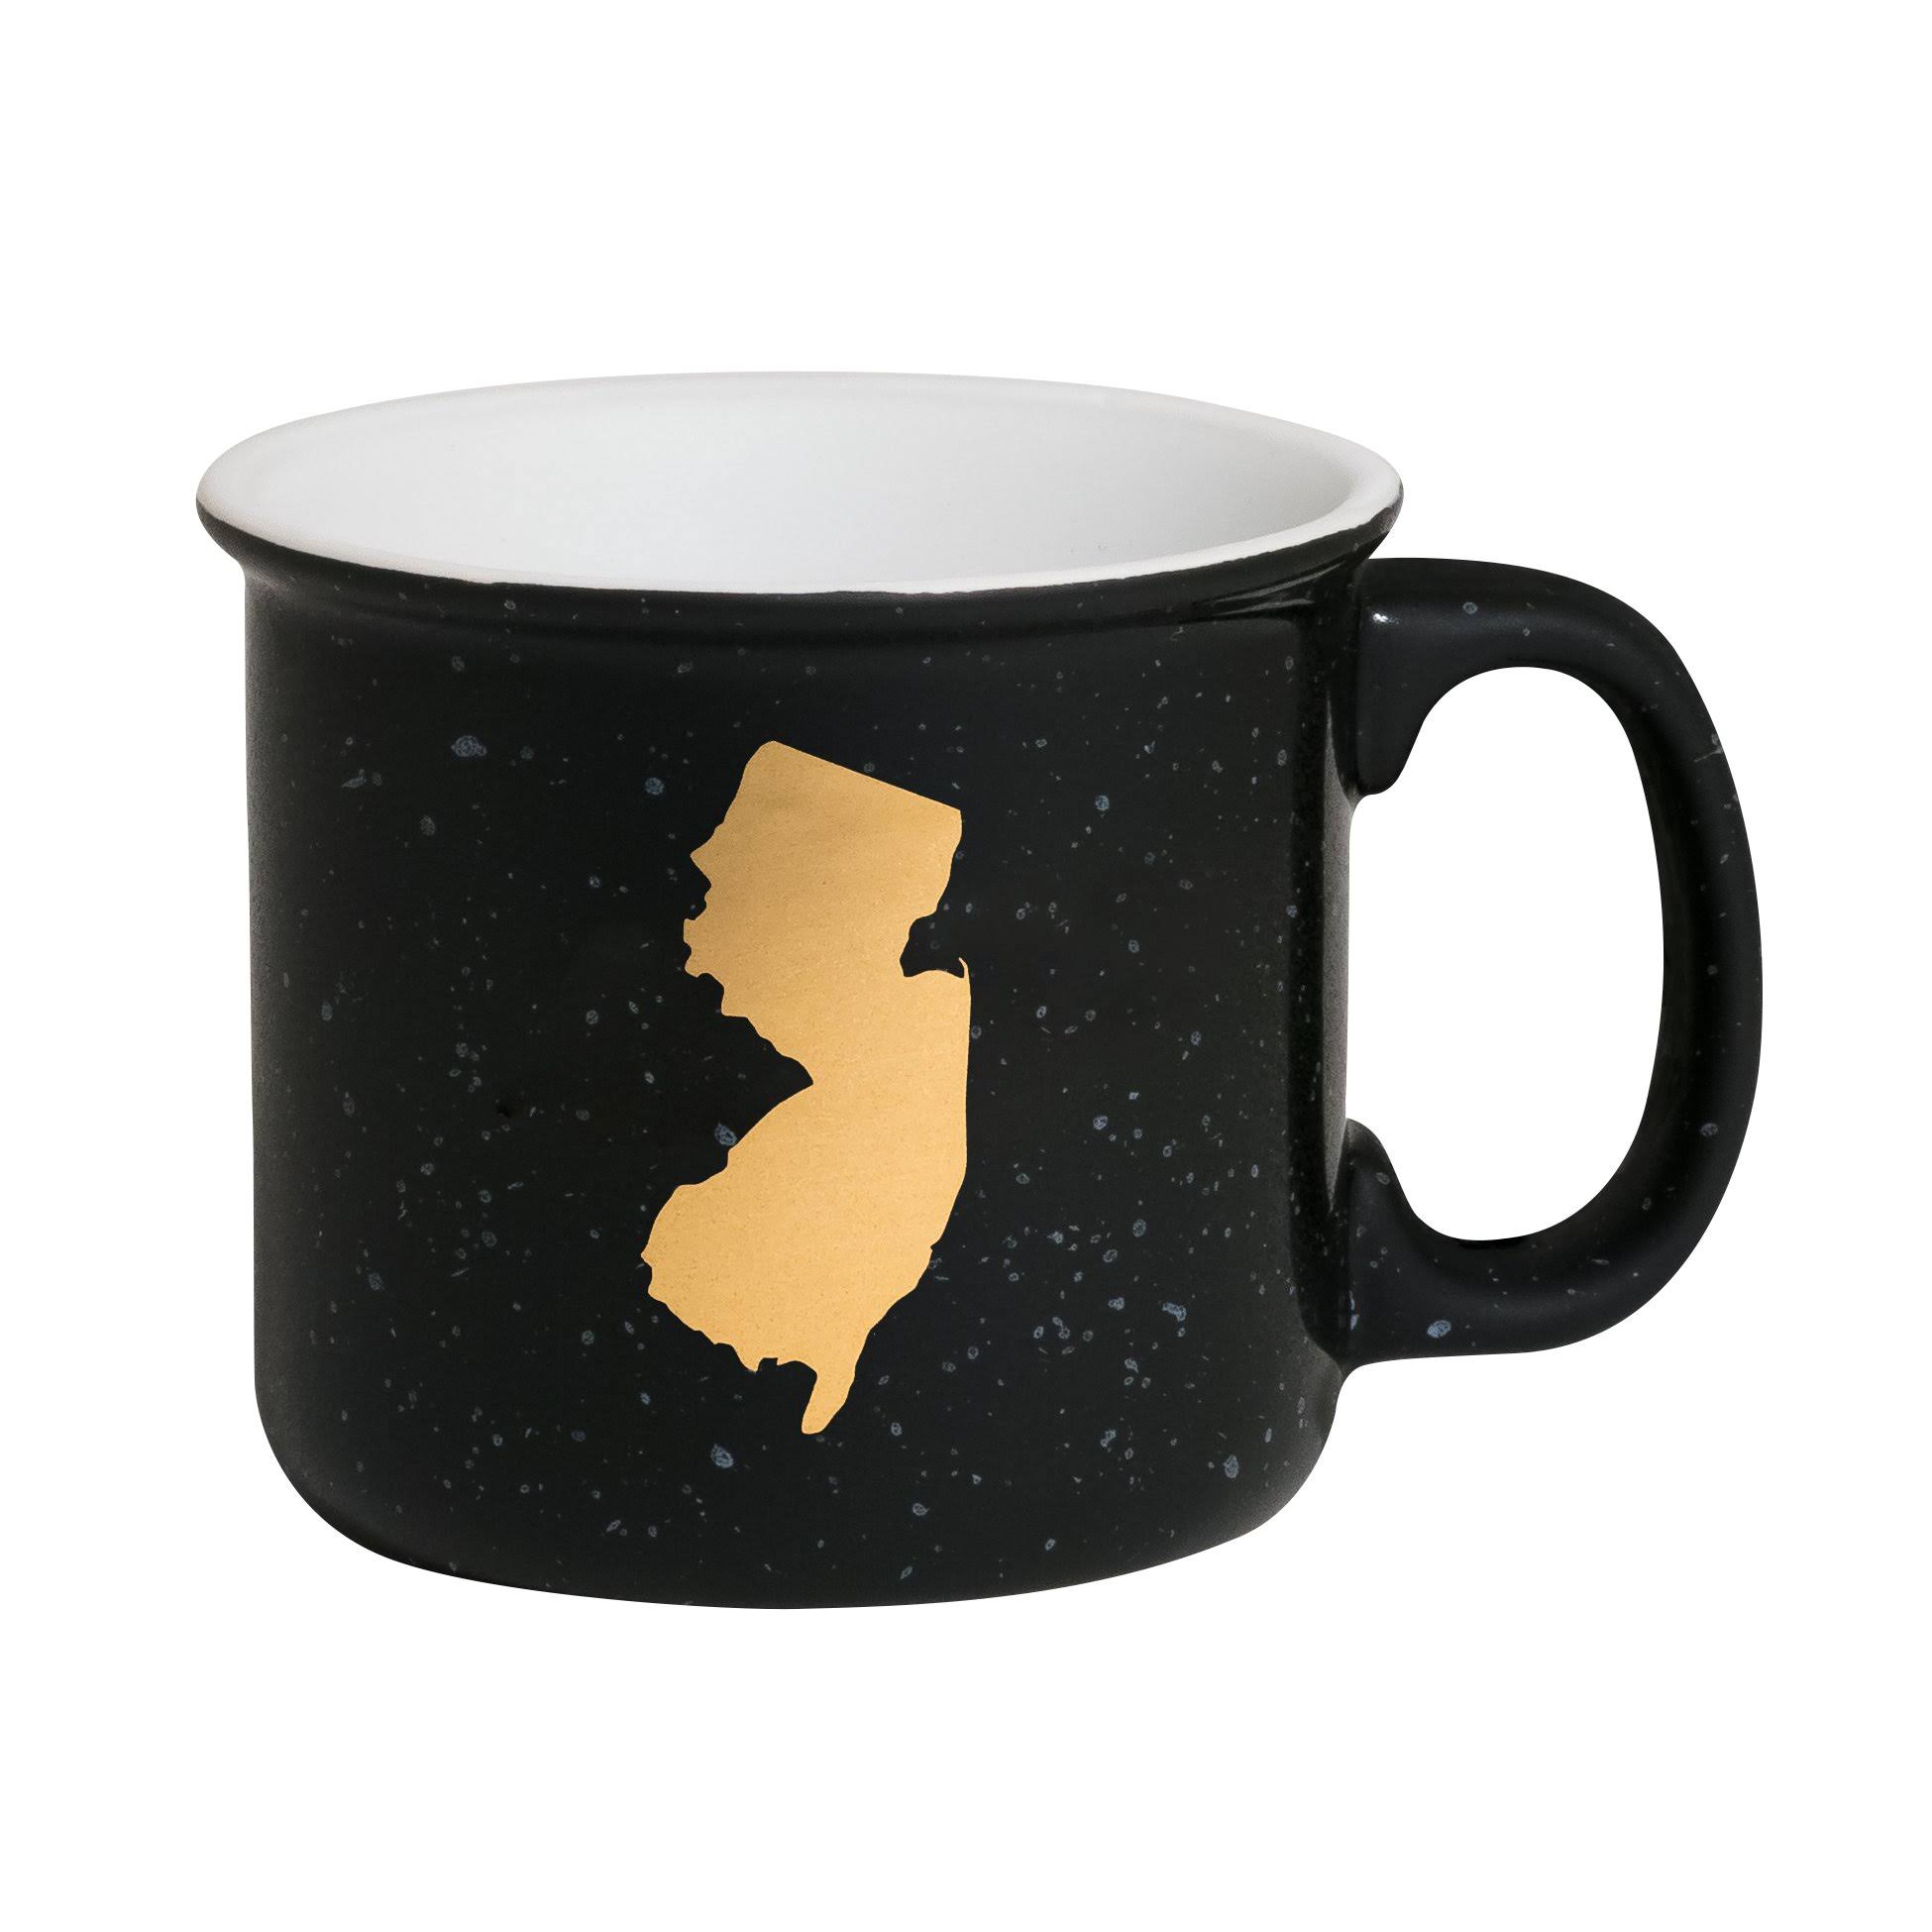 About Face Designs 186609 State of New Jersey Stoneware Coffee Mug 13.5 oz. Black